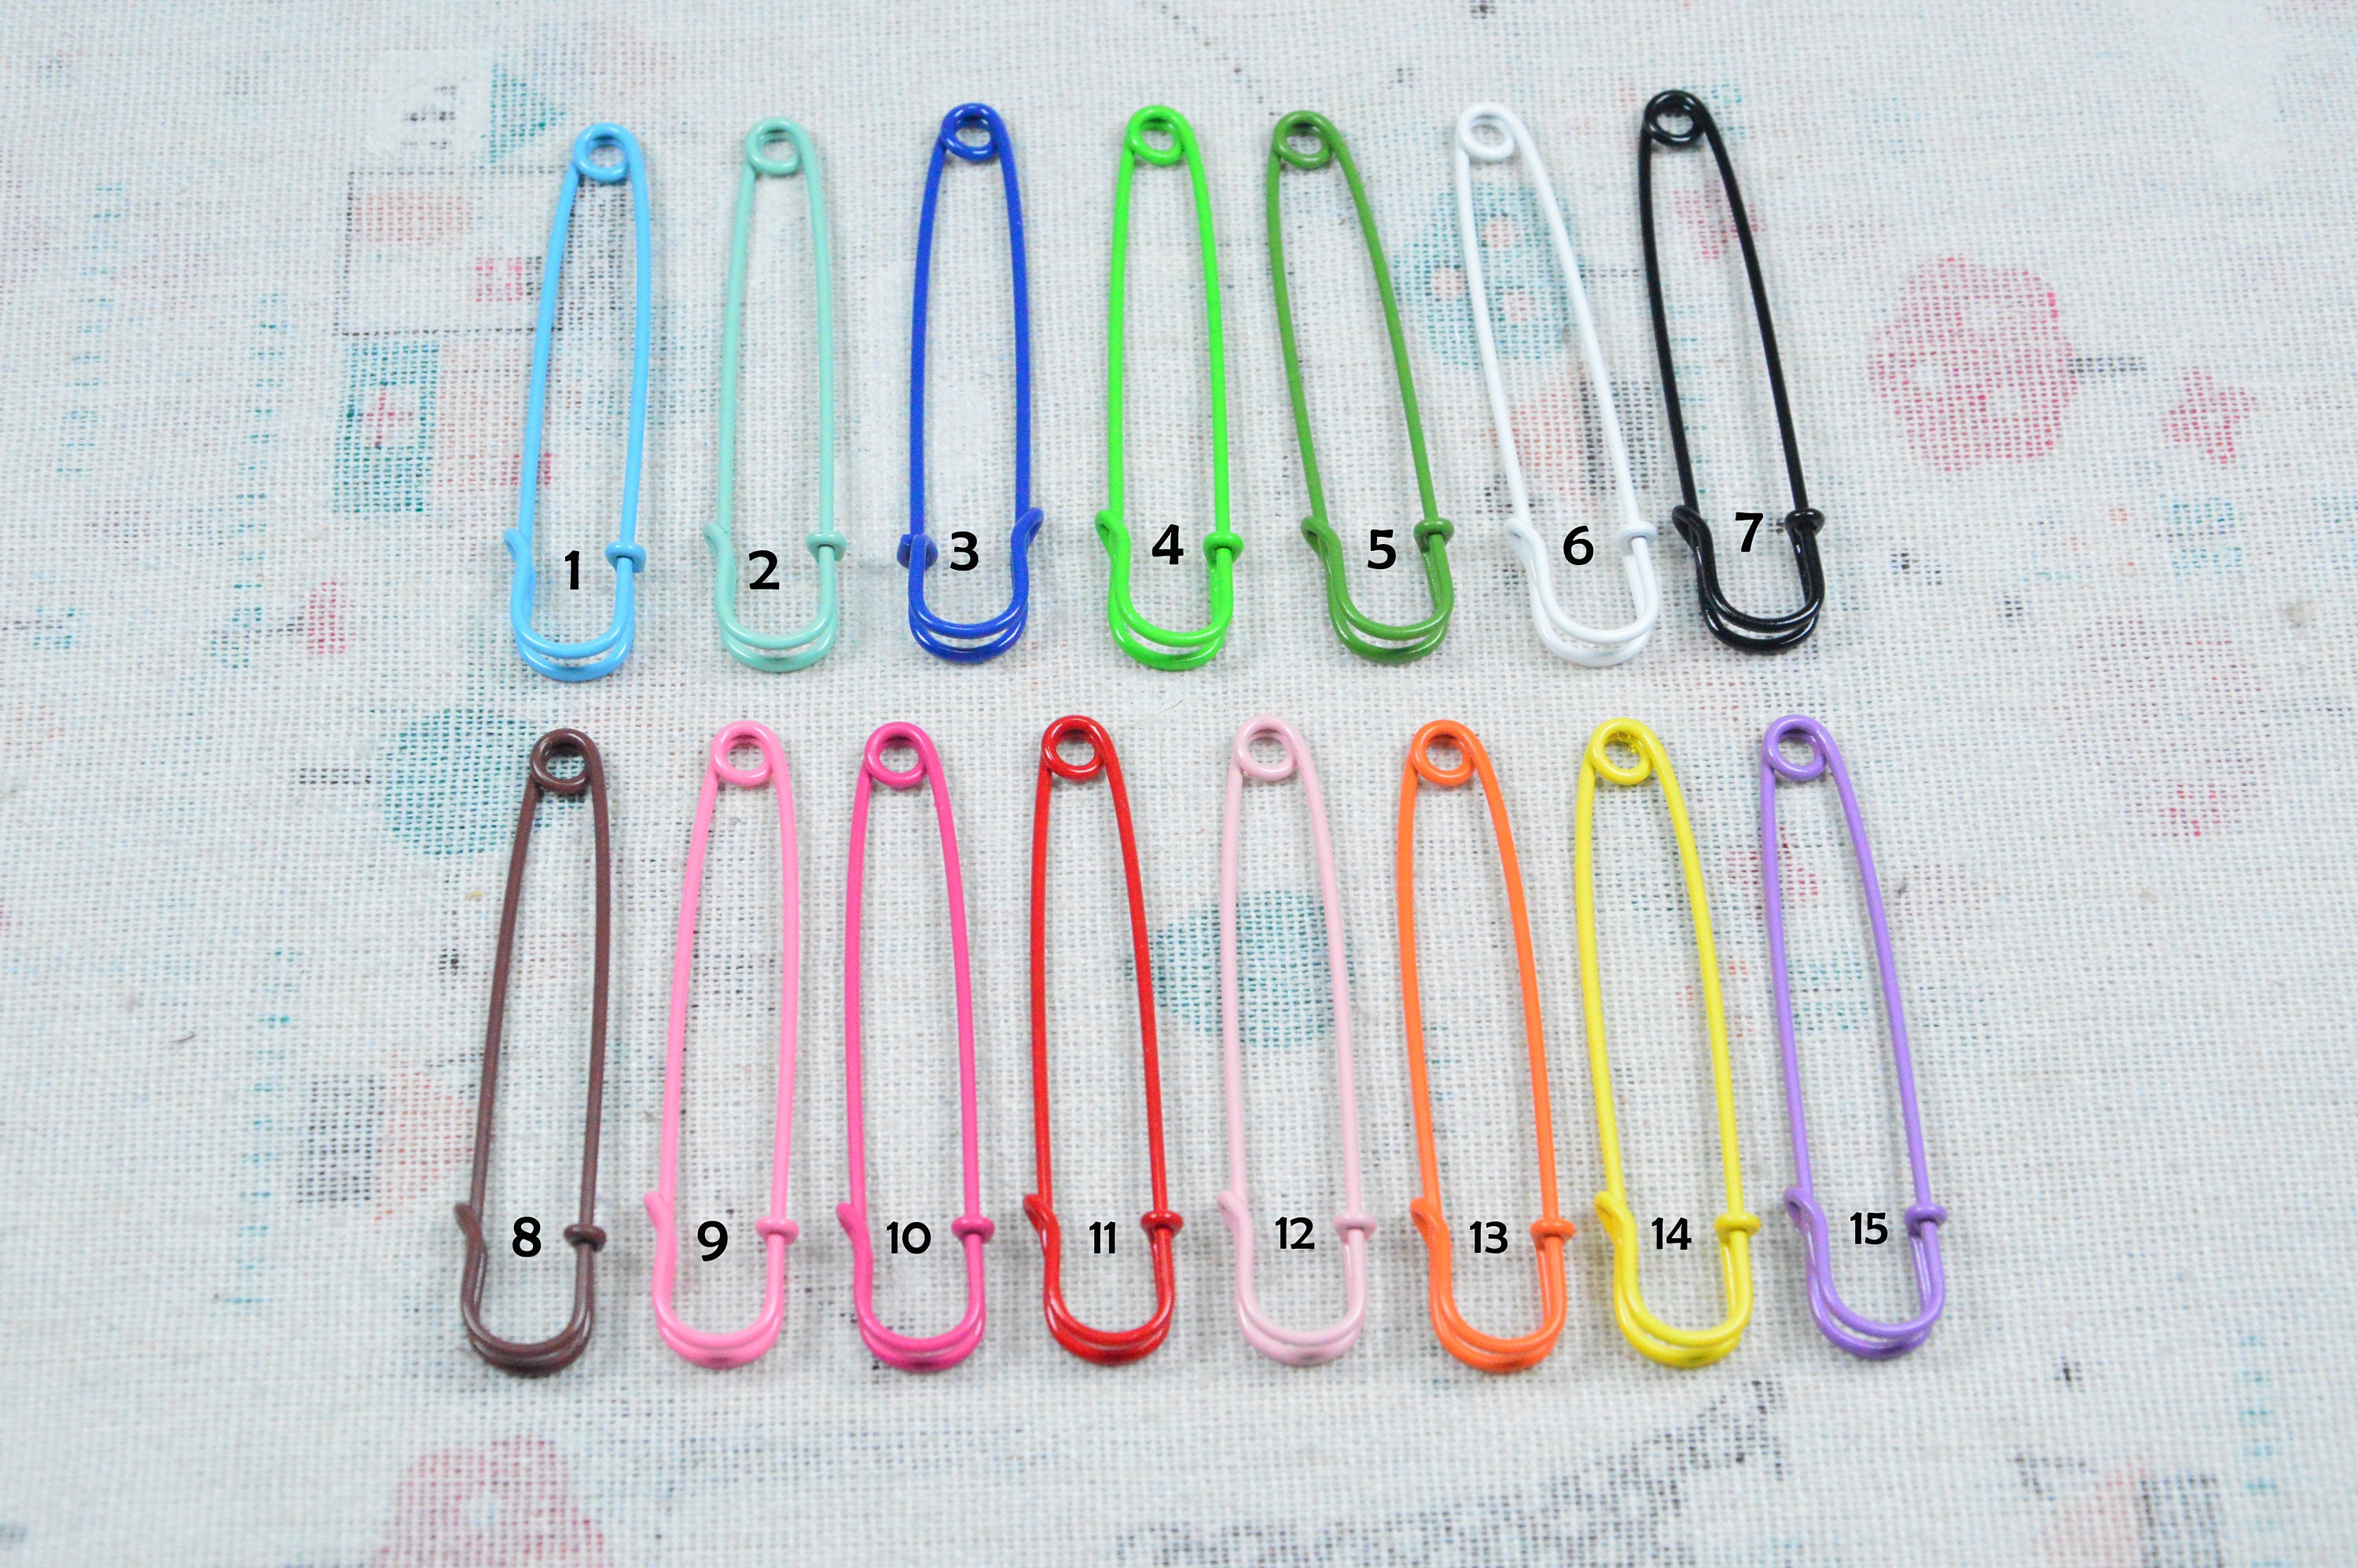 10 Pcs Safety Pins2 Inch Long Colorful Safety Pins50mm 